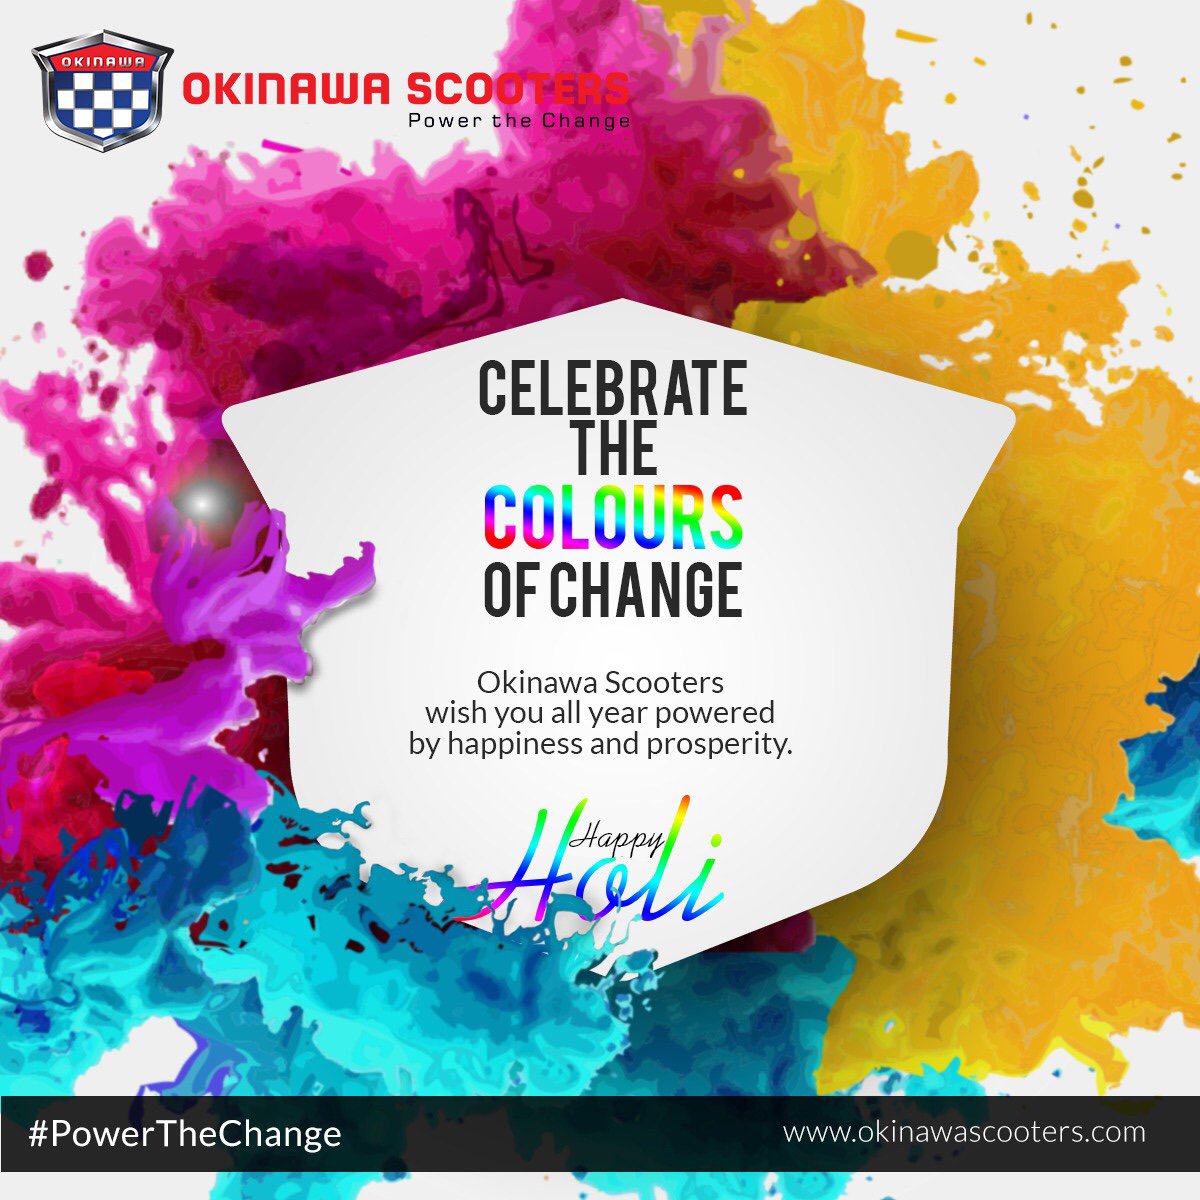 Add some colour to power a year full of happiness. Happy Holi to all, from Okinawa Scooters. #HappyHoli #Holi2018 #PlaySafeholi #GoGreen #PowerTheChange #EcoHoli